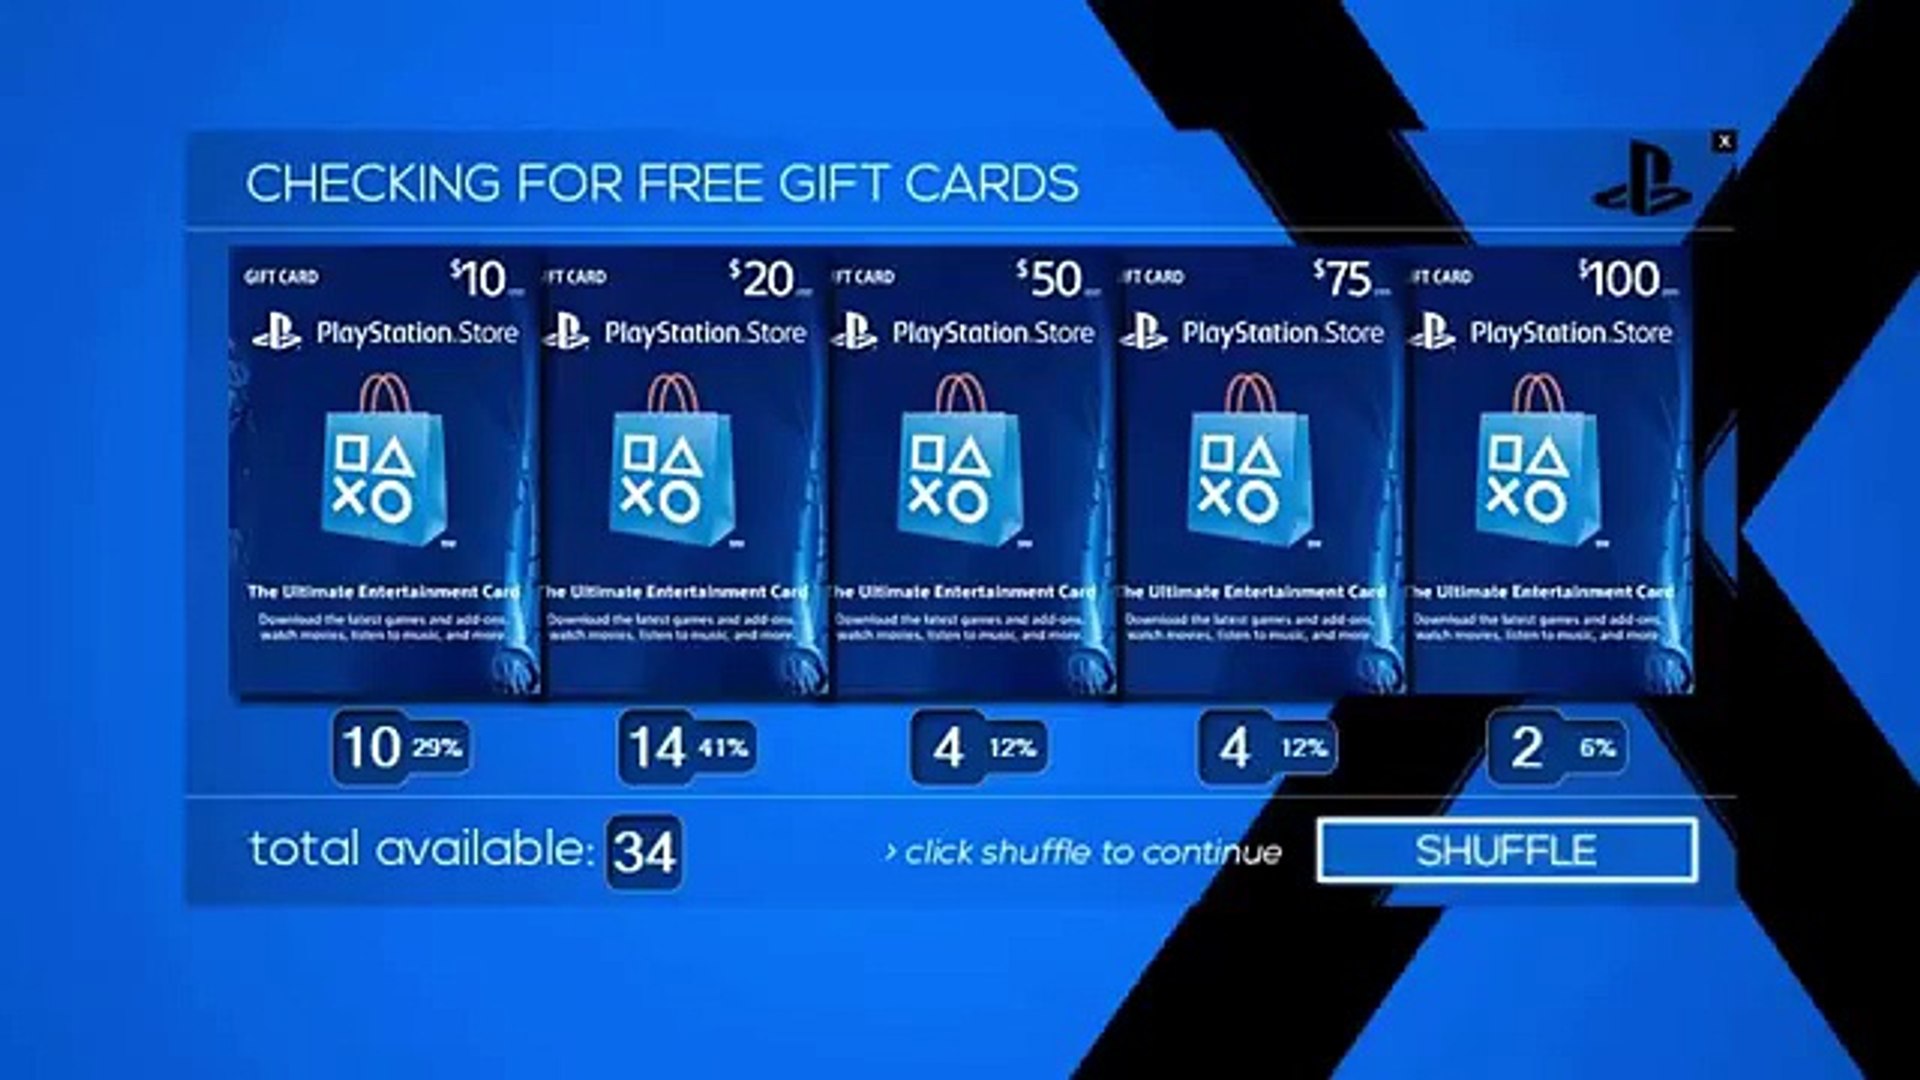 How To Get Free PSN Codes Free Playstation Network Codes - video Dailymotion